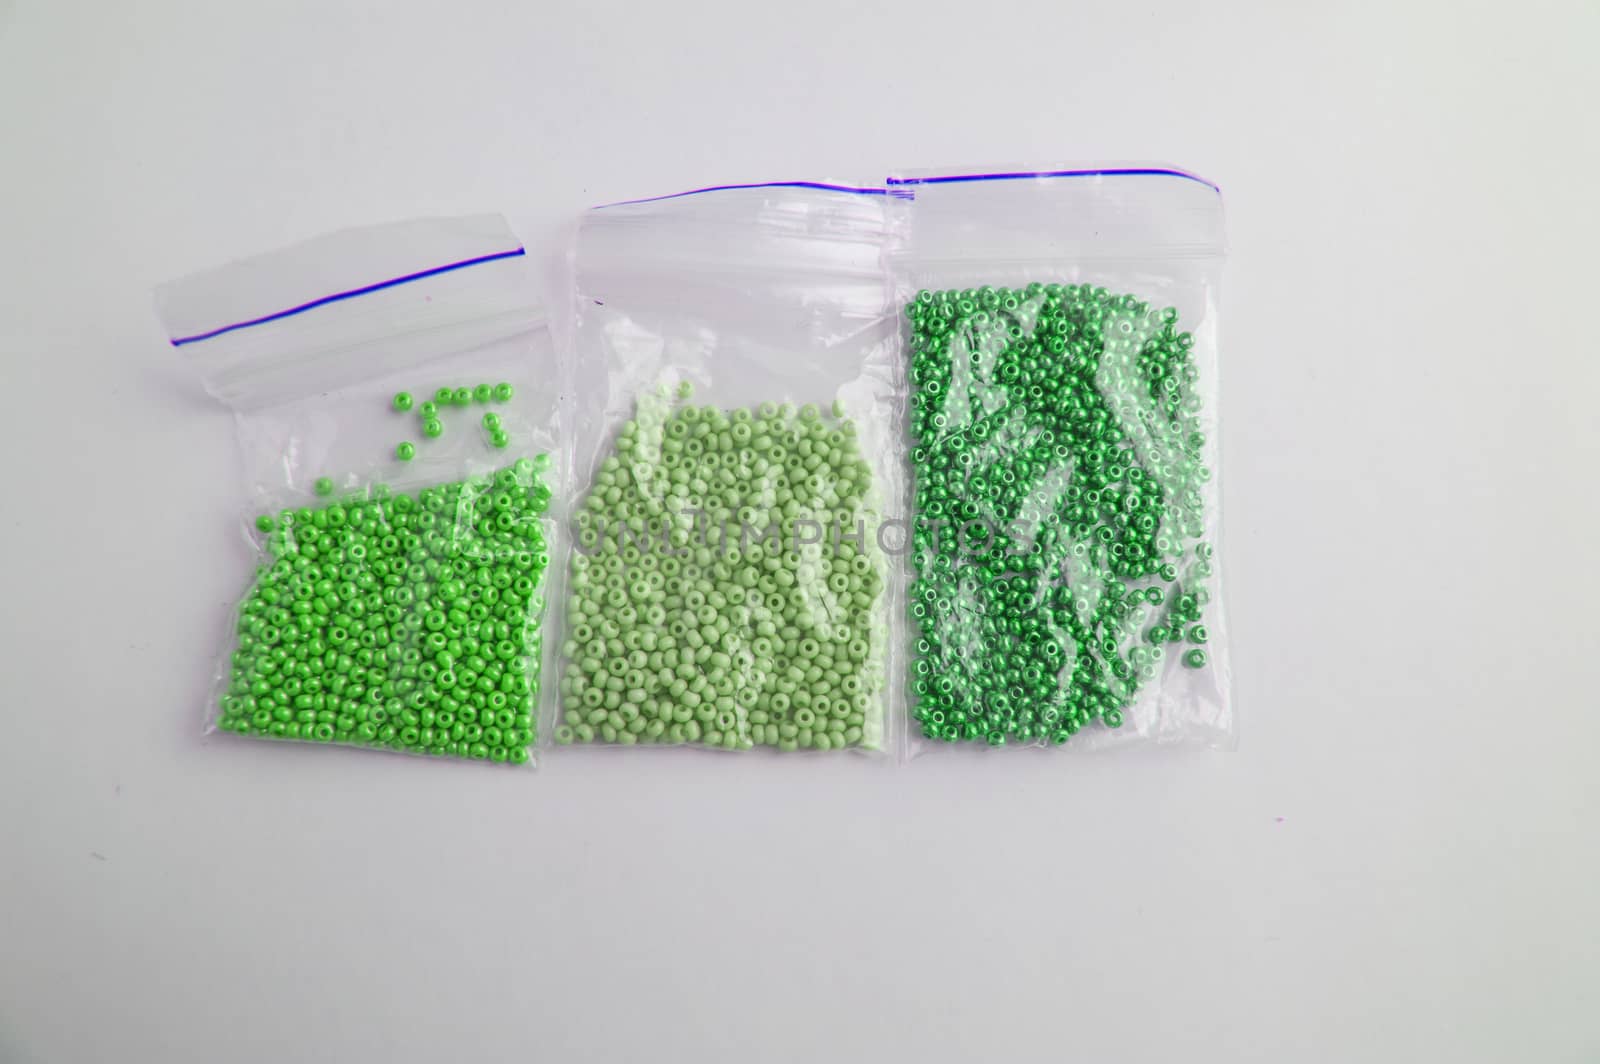 Set of multi-colored beads and beads in a mini plastic bag for embroidery needlework by claire_lucia